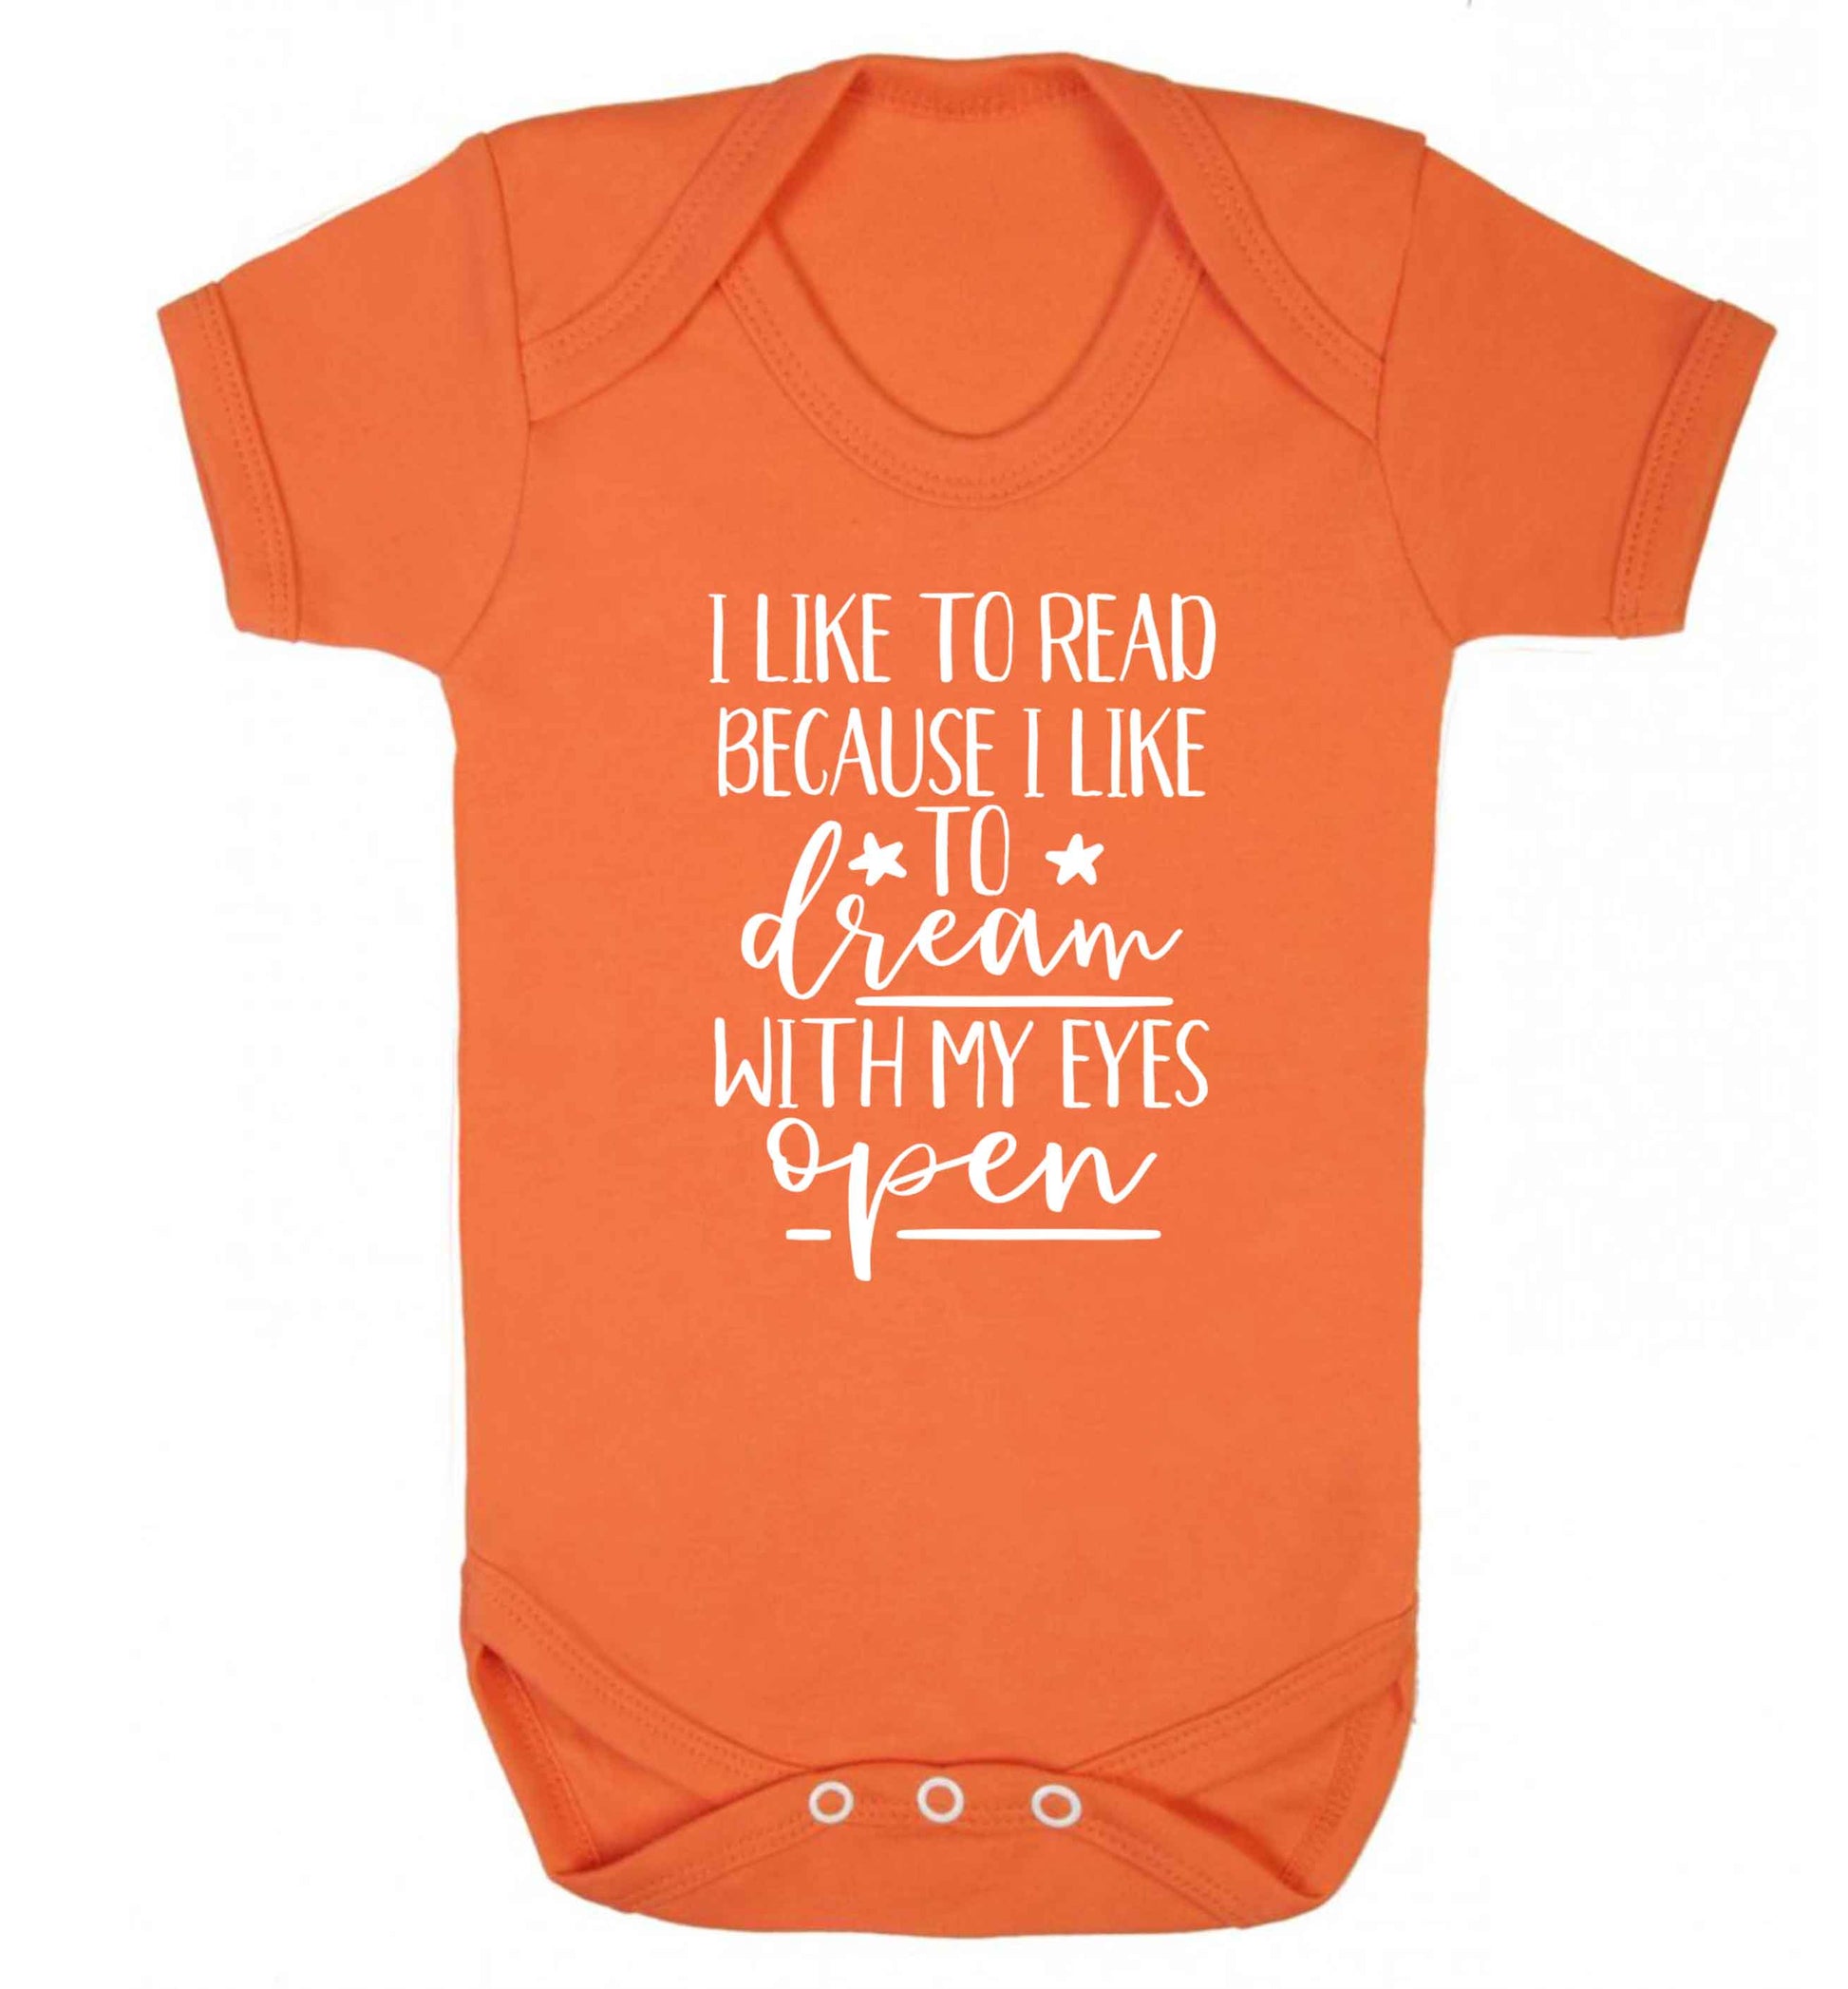 I like to read because I like to dream with my eyes open Baby Vest orange 18-24 months